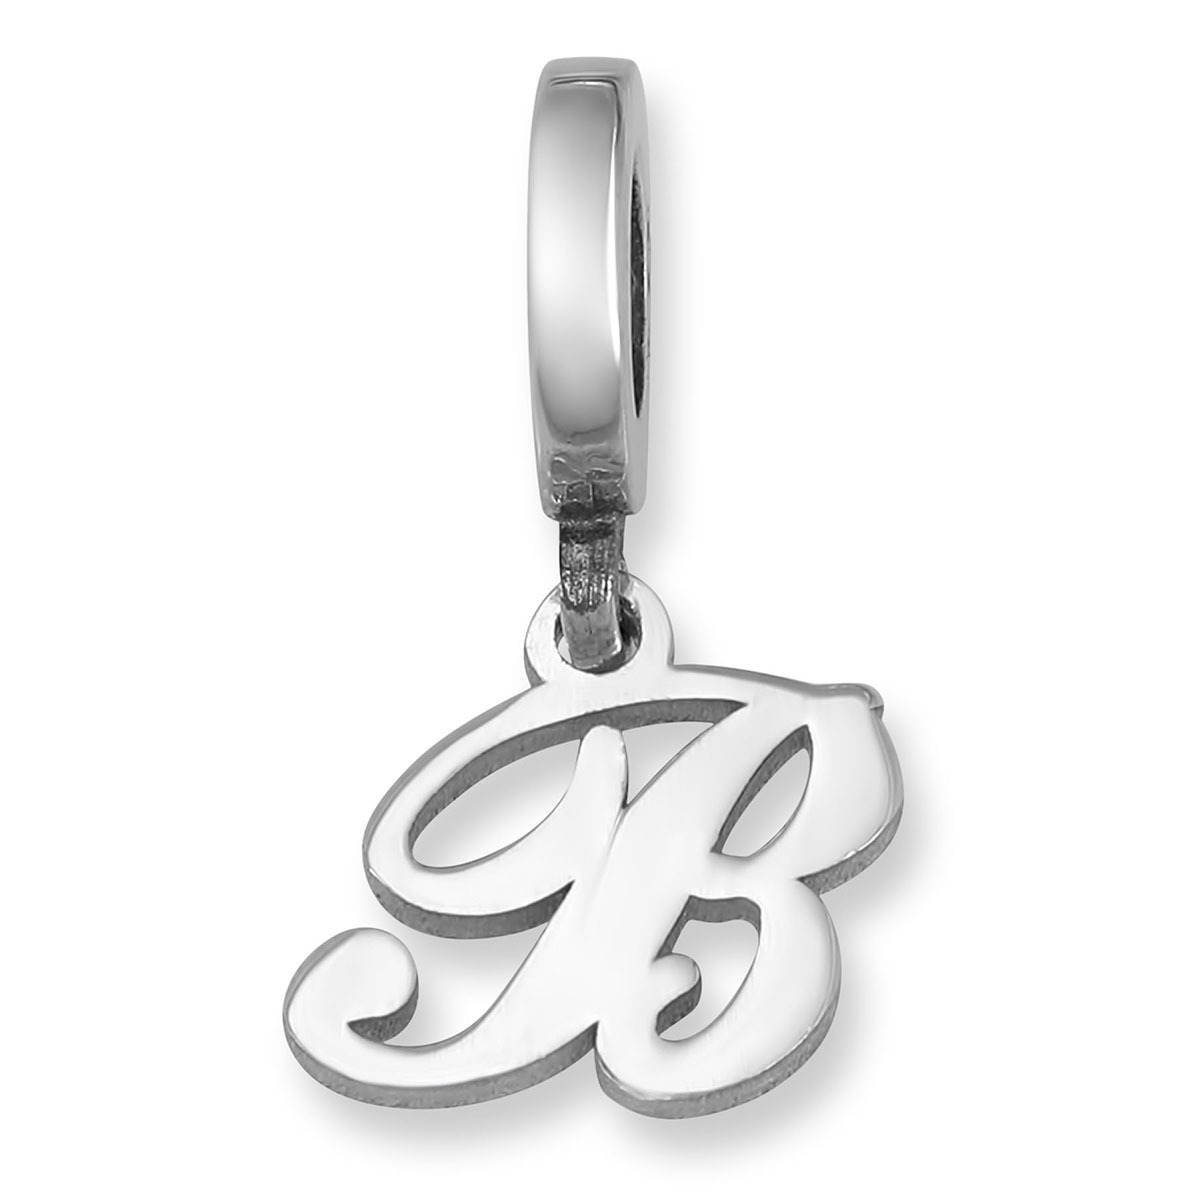 English Script Initial Sterling Silver Charm - 1